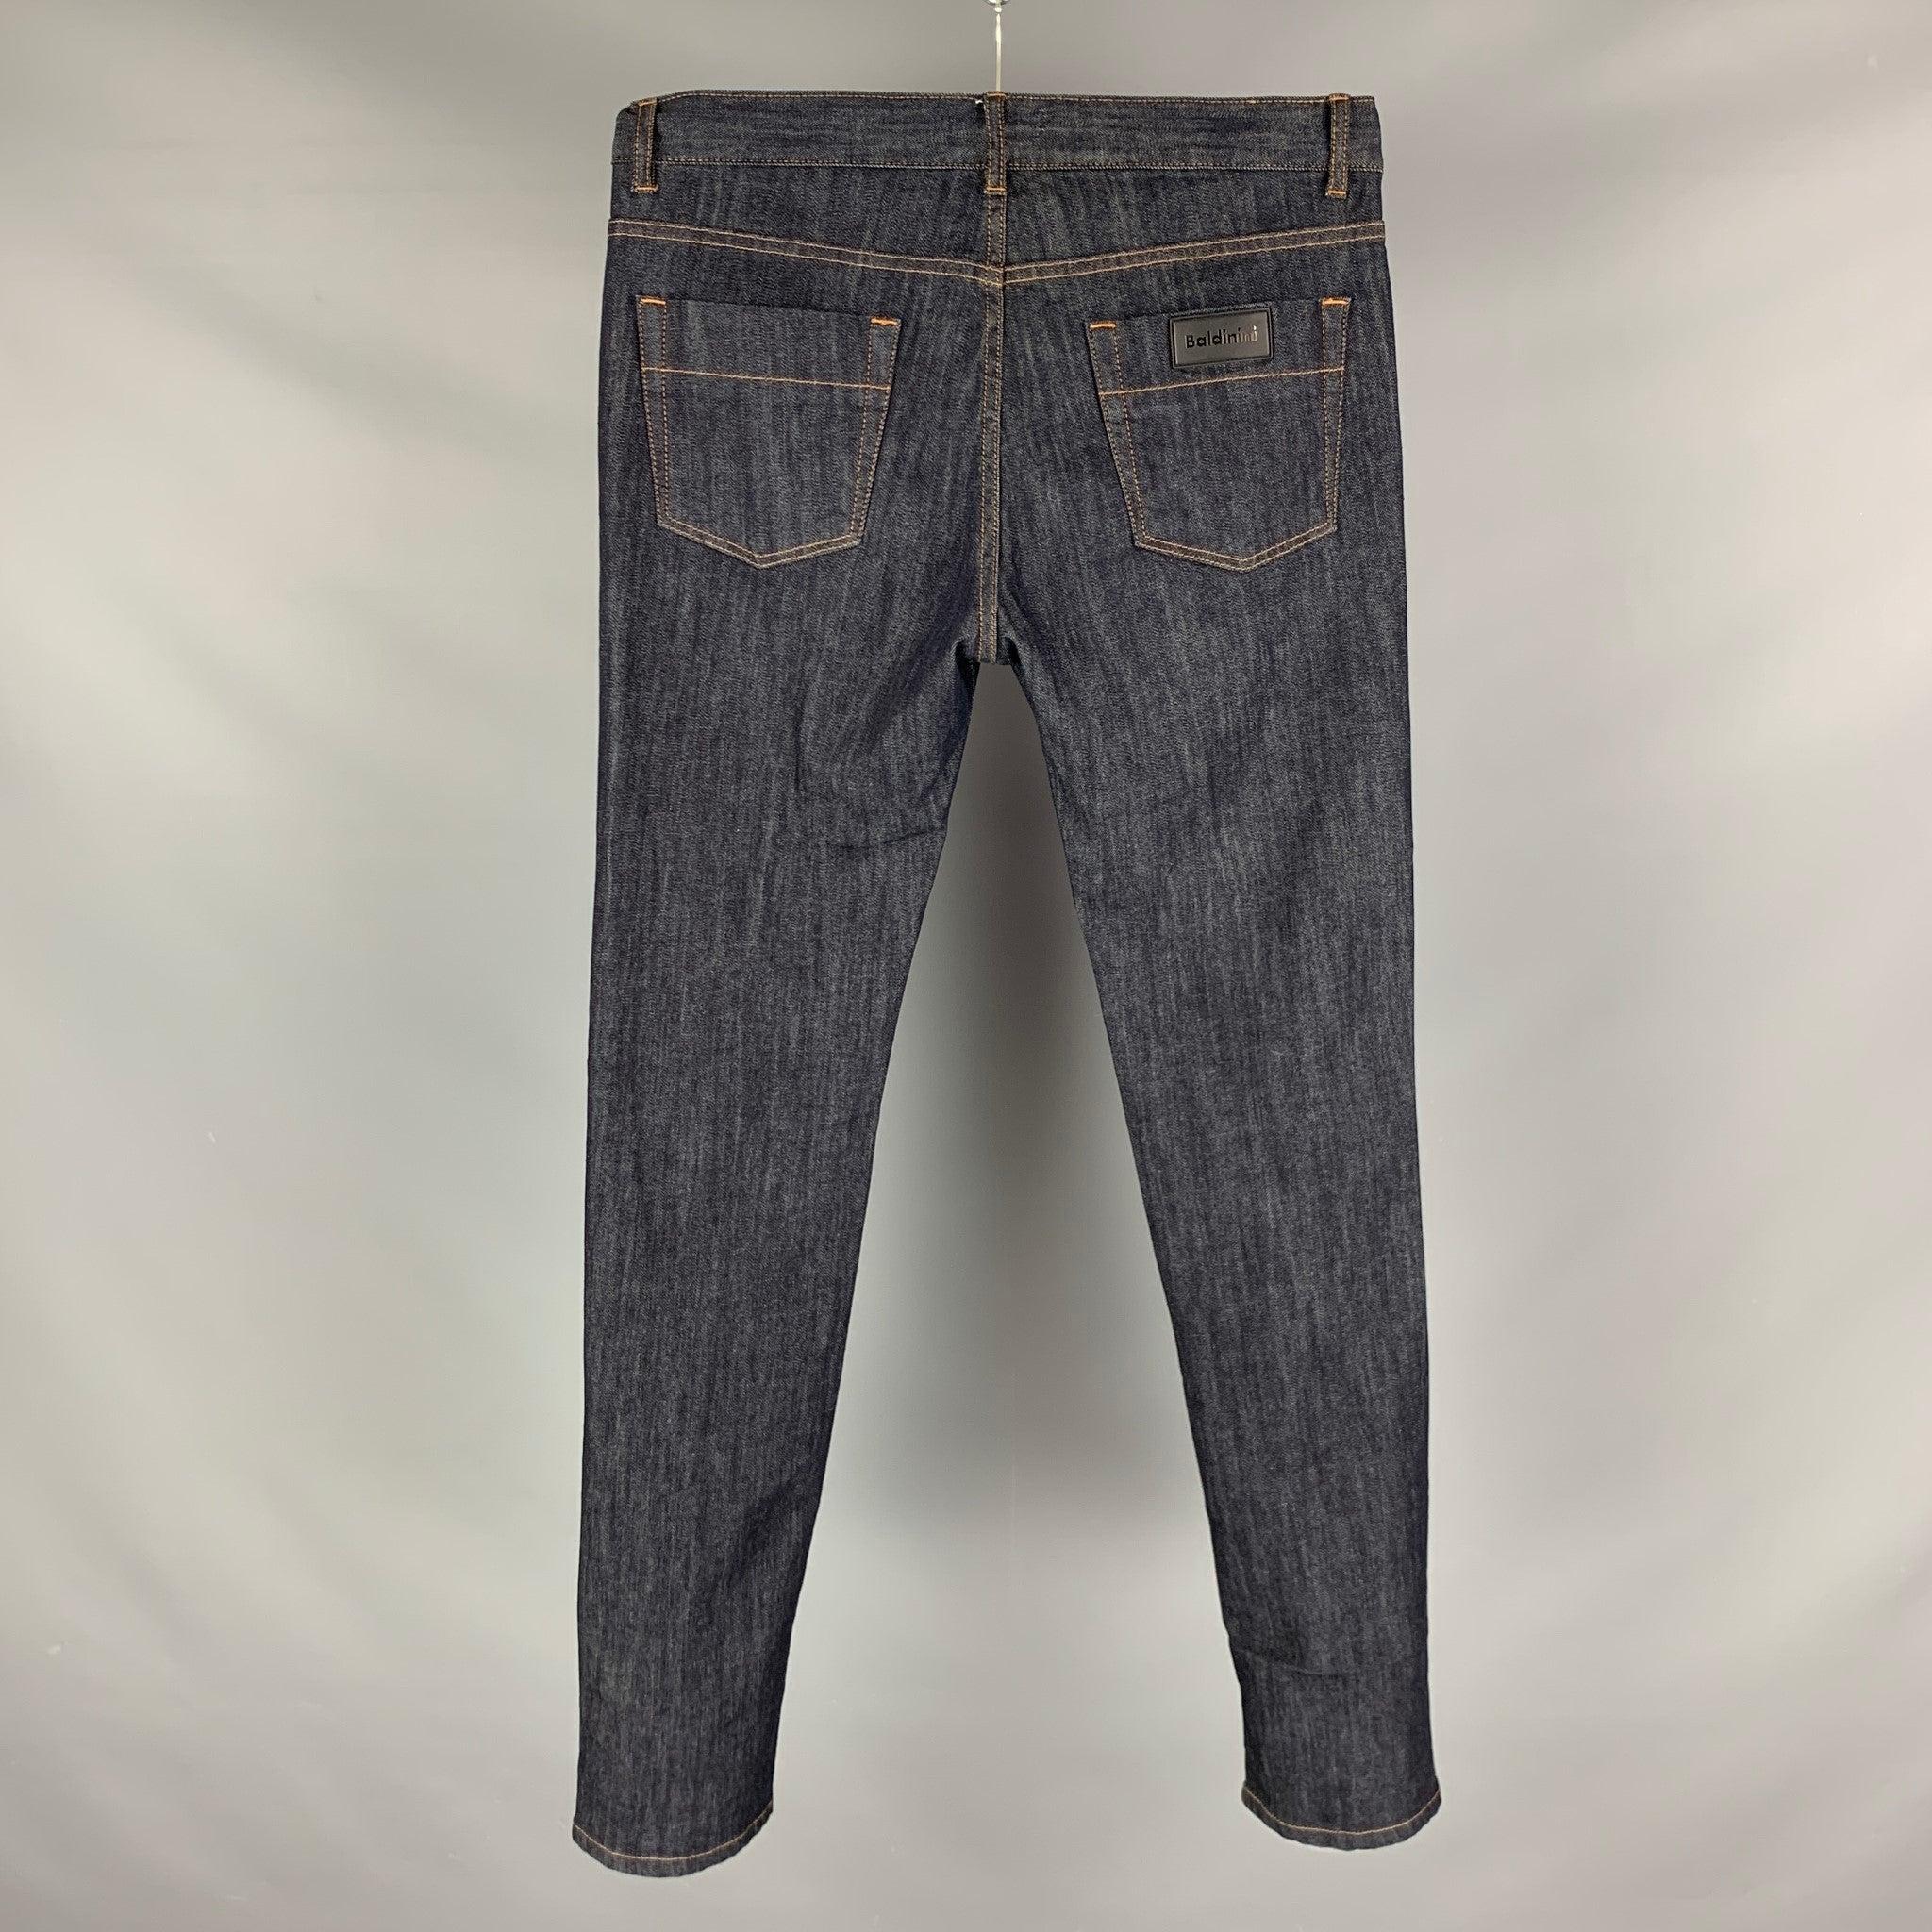 BALDININI jeans comes in a navy cotton and elastane denim featuring a straight fit, contrast stitching, and a zip fly closure. Made in Italy.Excellent Pre- Owned Conditions. 

Marked:   34 

Measurements: 
  Waist: 34 inches Rise: 13 inches Inseam: